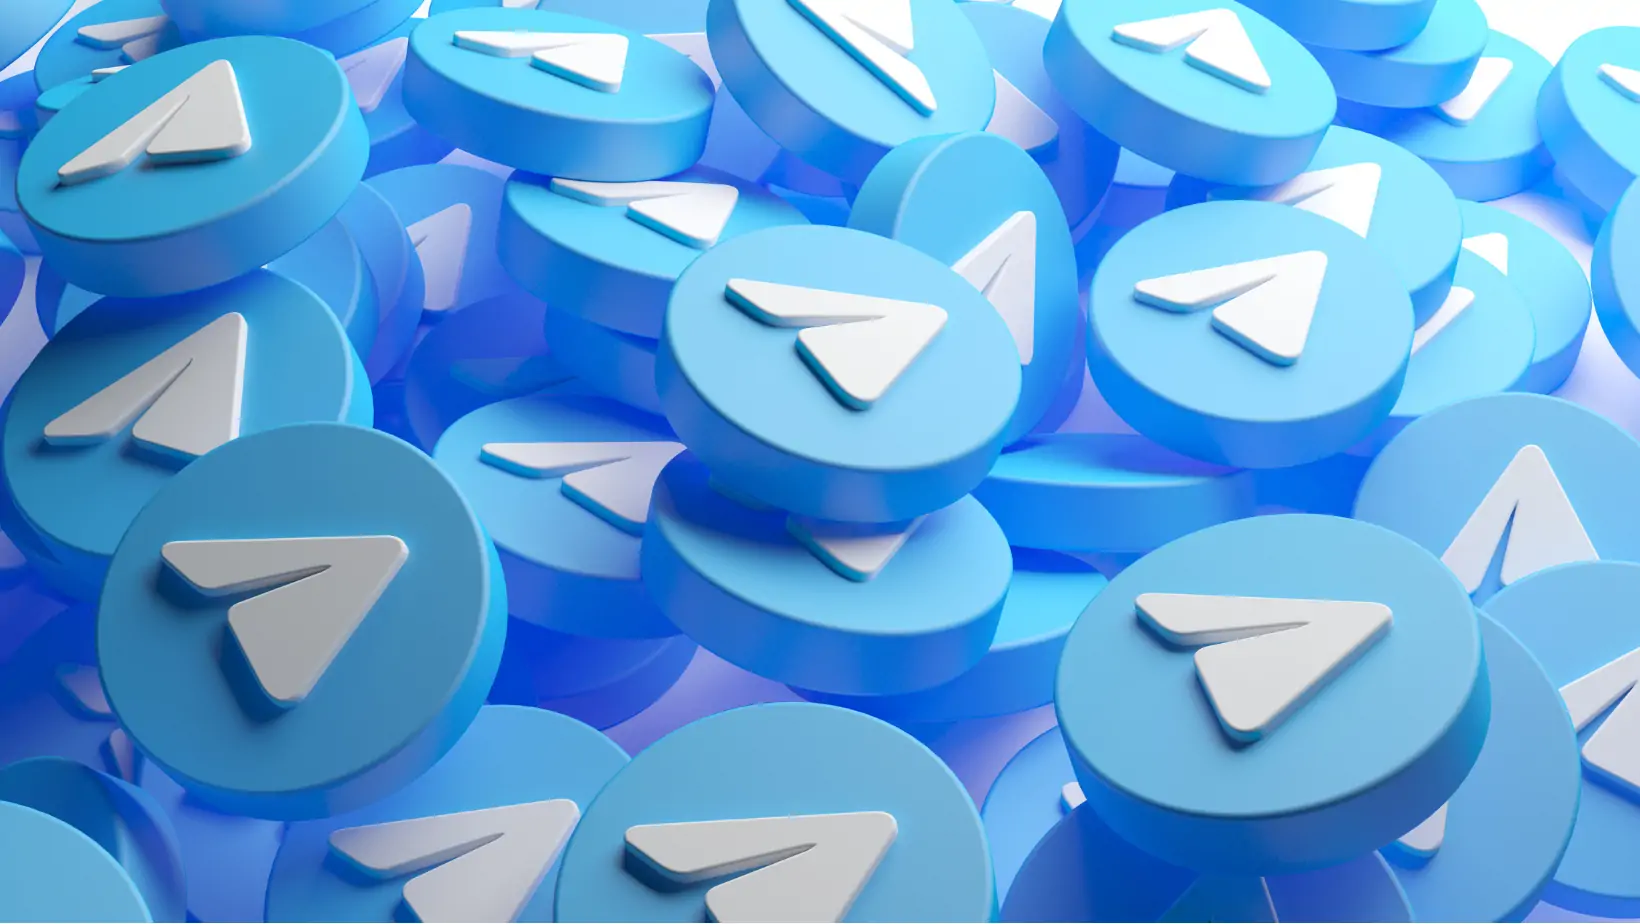 Telegram to Launch Ad Platform, Offering Revenue Sharing for Channel Owners